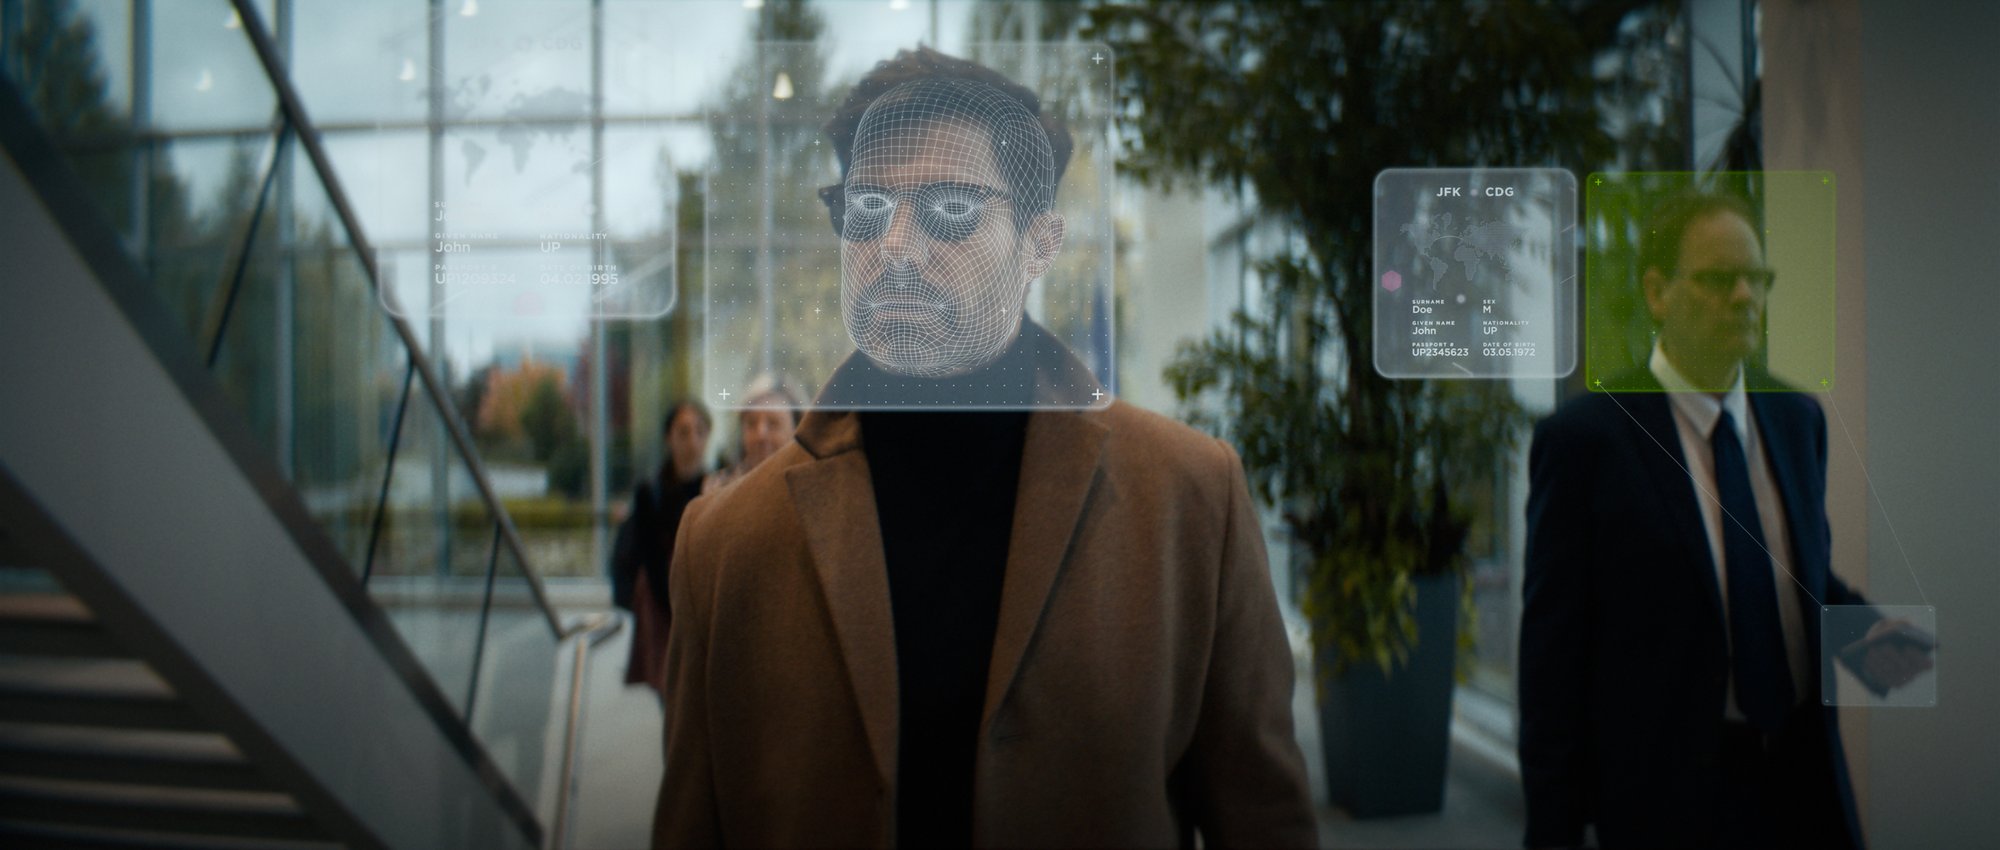  A man wearing eyeglasses walking with a hologram effect on his face.